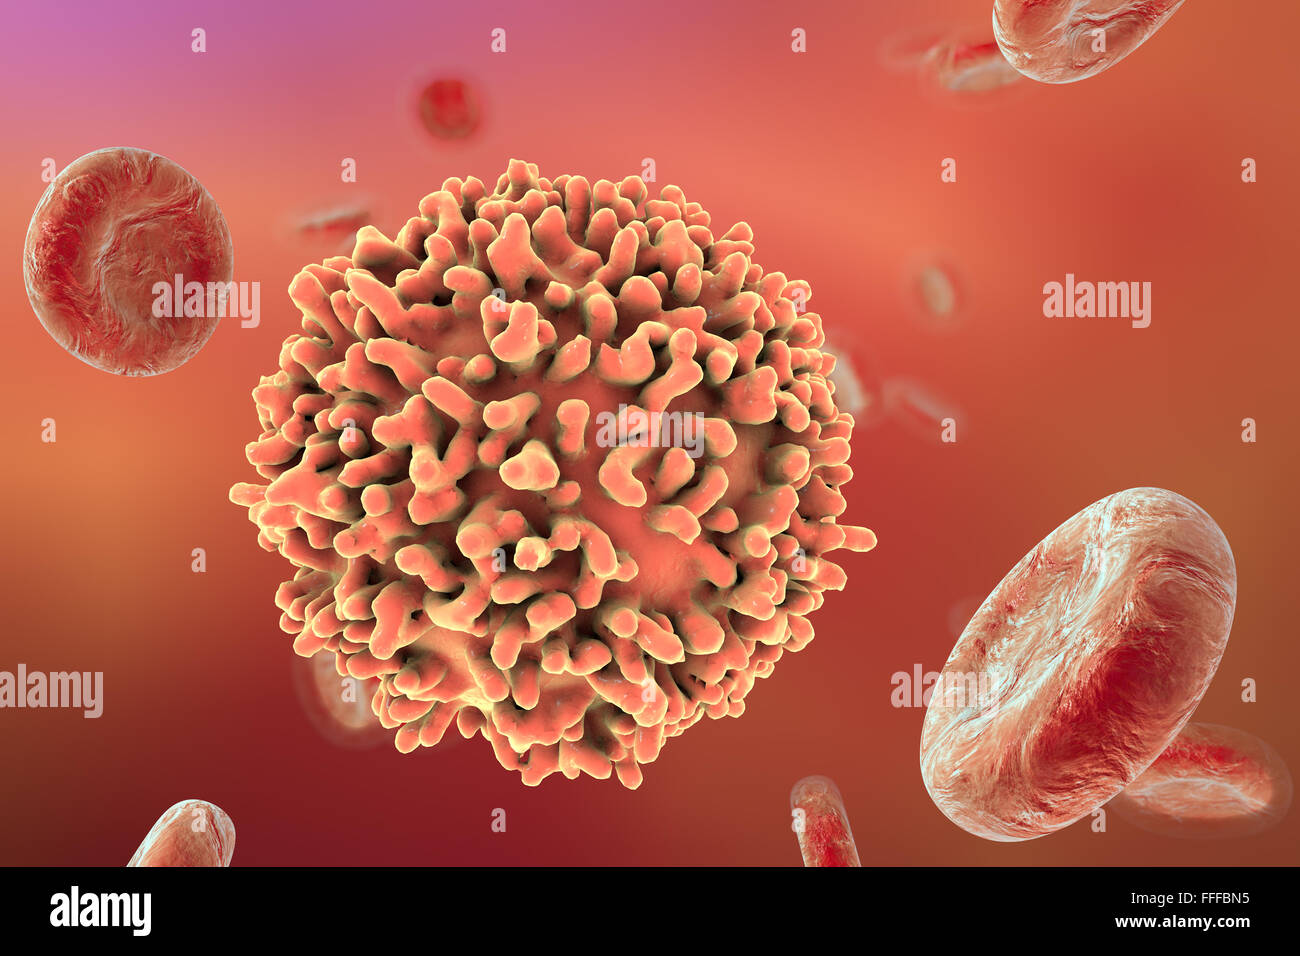 B-lymphocyte in blood with red blood cells, computer artwork. Stock Photo